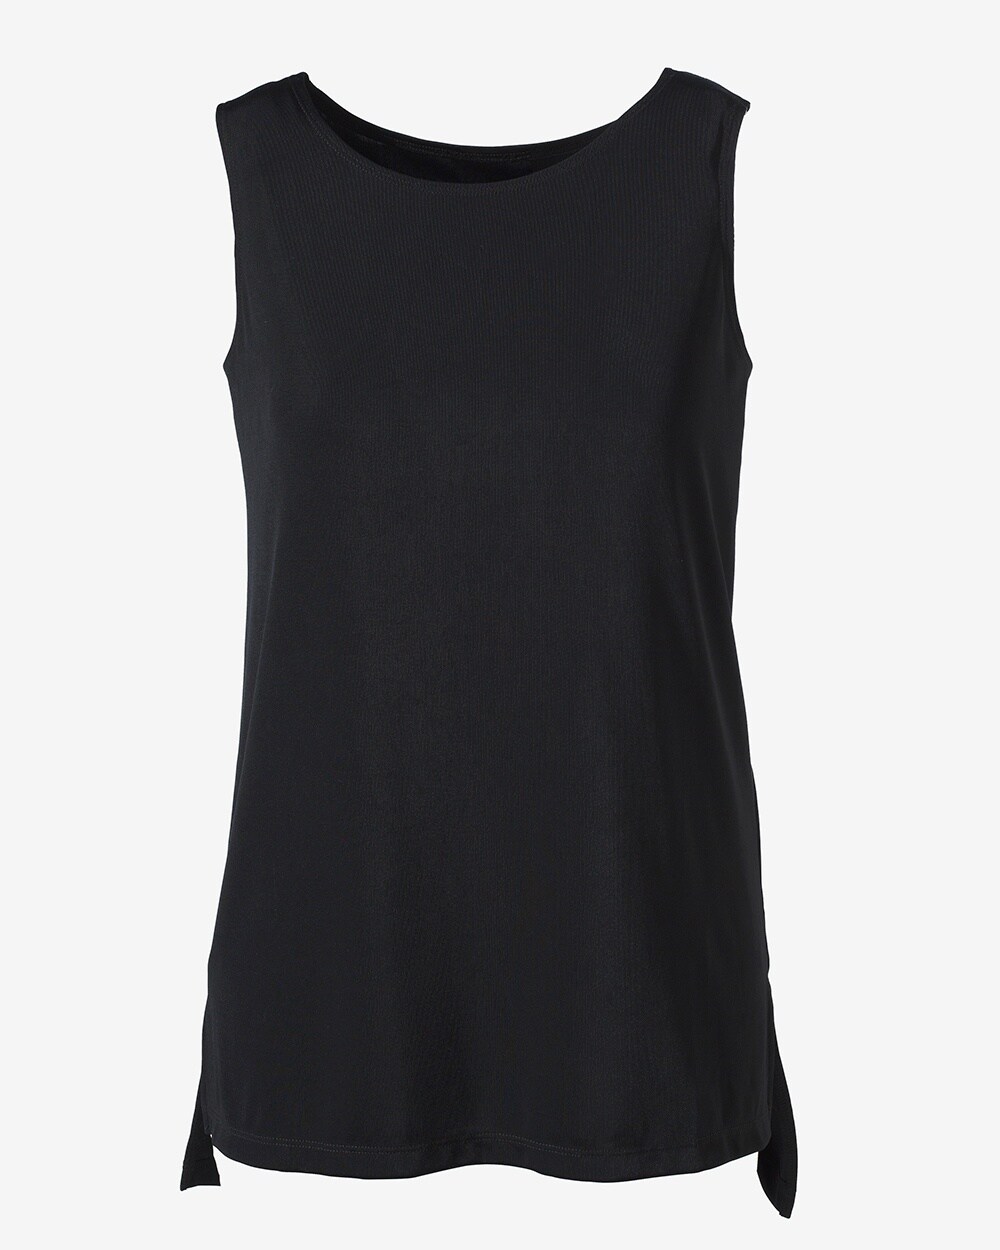 Easywear Tunic Tank Top - Chico's Off The Rack - Chico's Outlet